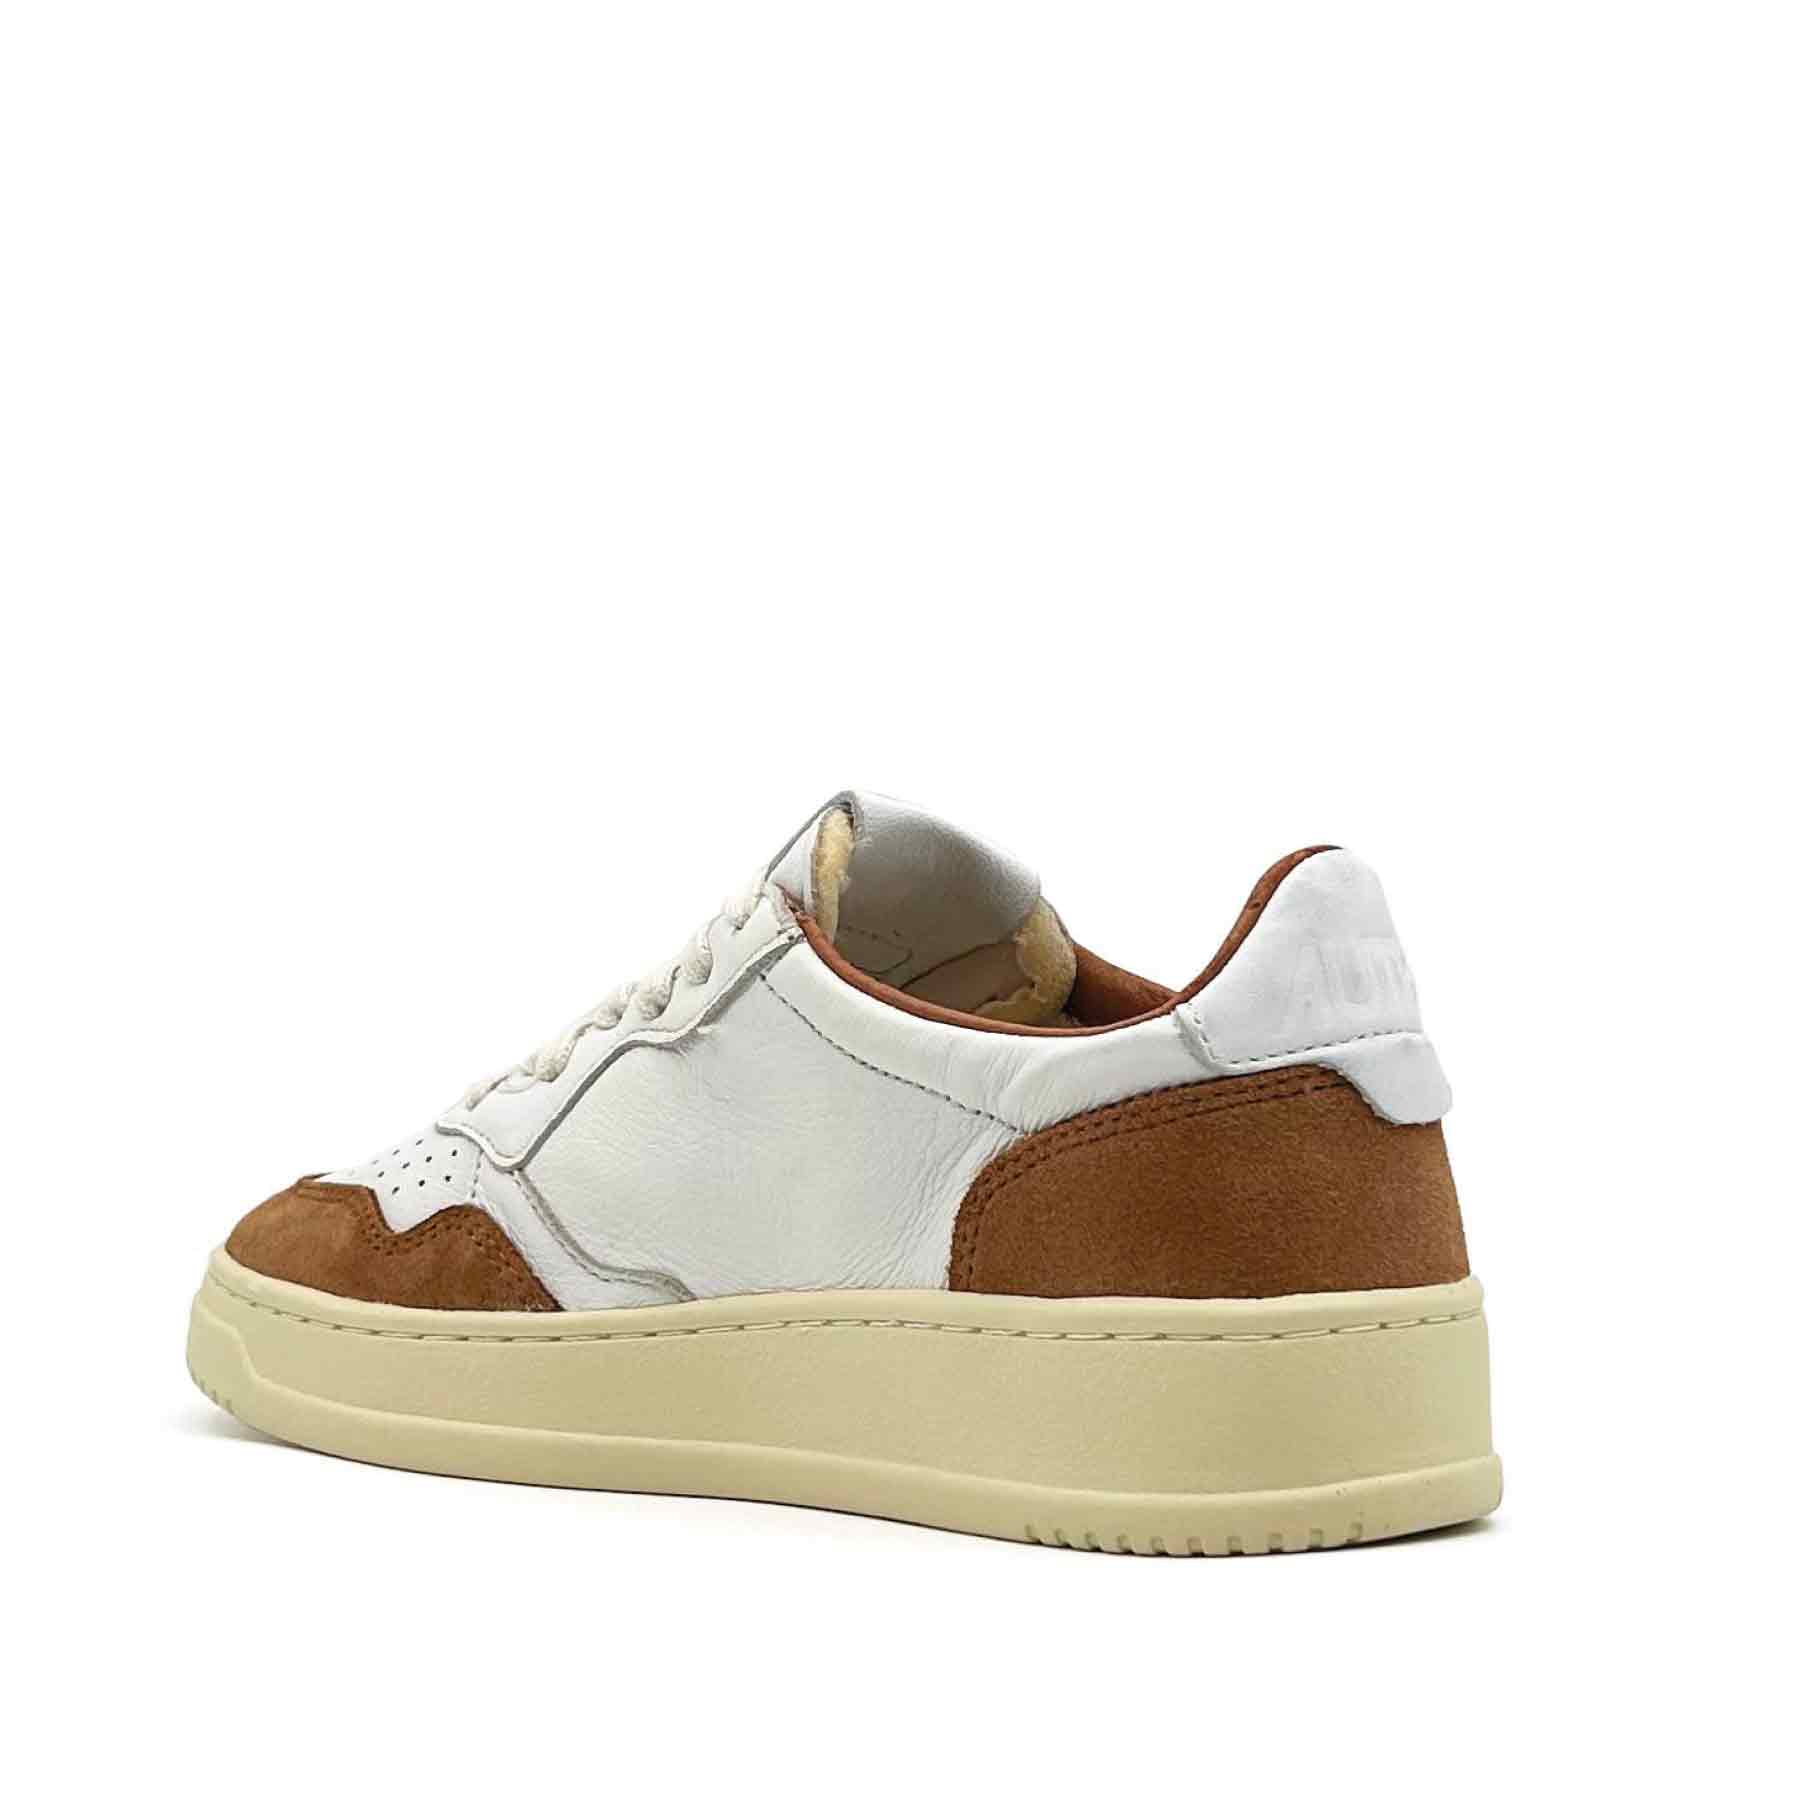 Medalist Low Women White Goat Leather Caramel Suede